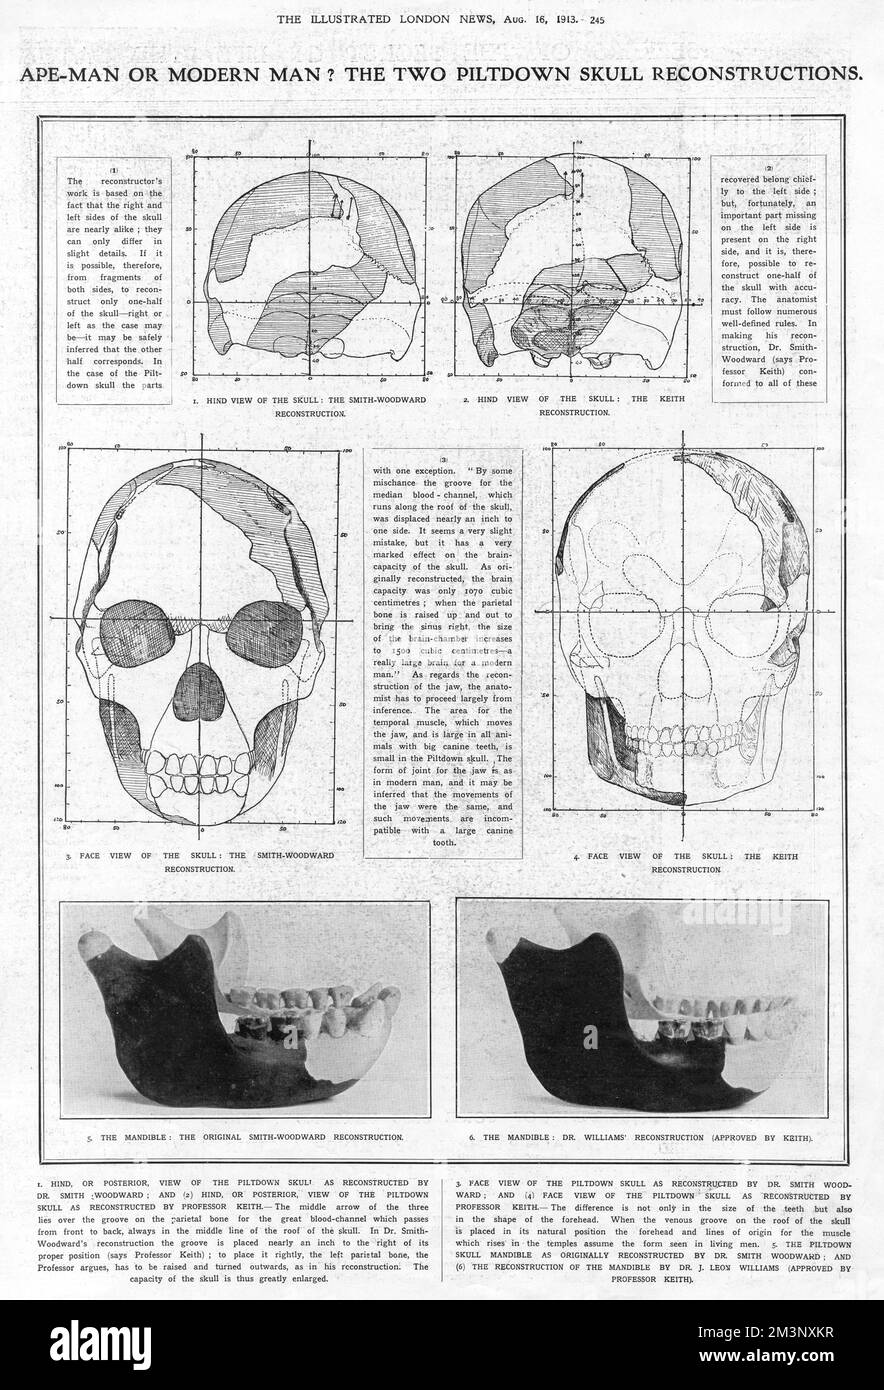 Ape-Man of Modern Man? The two Piltdown skull reconstructions. A page from the Illustrated London News, debating the merits of Dr. A. Smith-Woodward's reconstructions of the Piltdown Man's skull and mandible over the reconstructions proposed by Professor Arthur Keith and Dr. J Leon Williams. In 1953, the find proved to be a hoax; a combination of the skull of a medieval man, the jaw of an orangutan, and chimpanzee teeth.     Date: 1913 Stock Photo